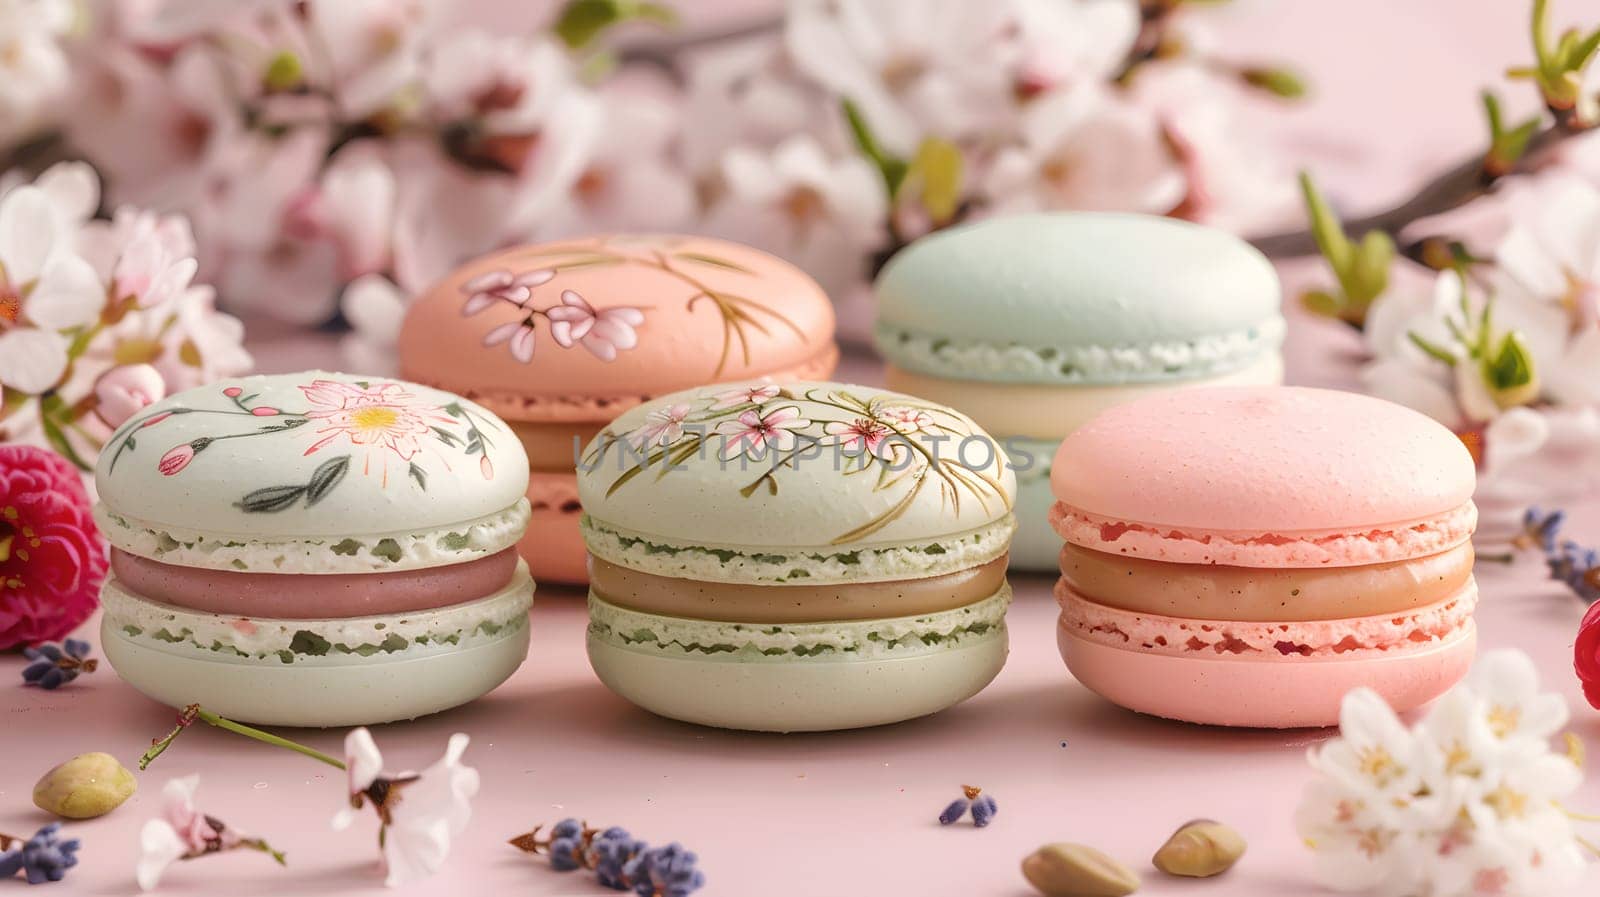 A group of colorful macarons displayed on a pink table adorned with flowers. These baked goods are a sweet treat made with various ingredients and are a popular dessert in French cuisine